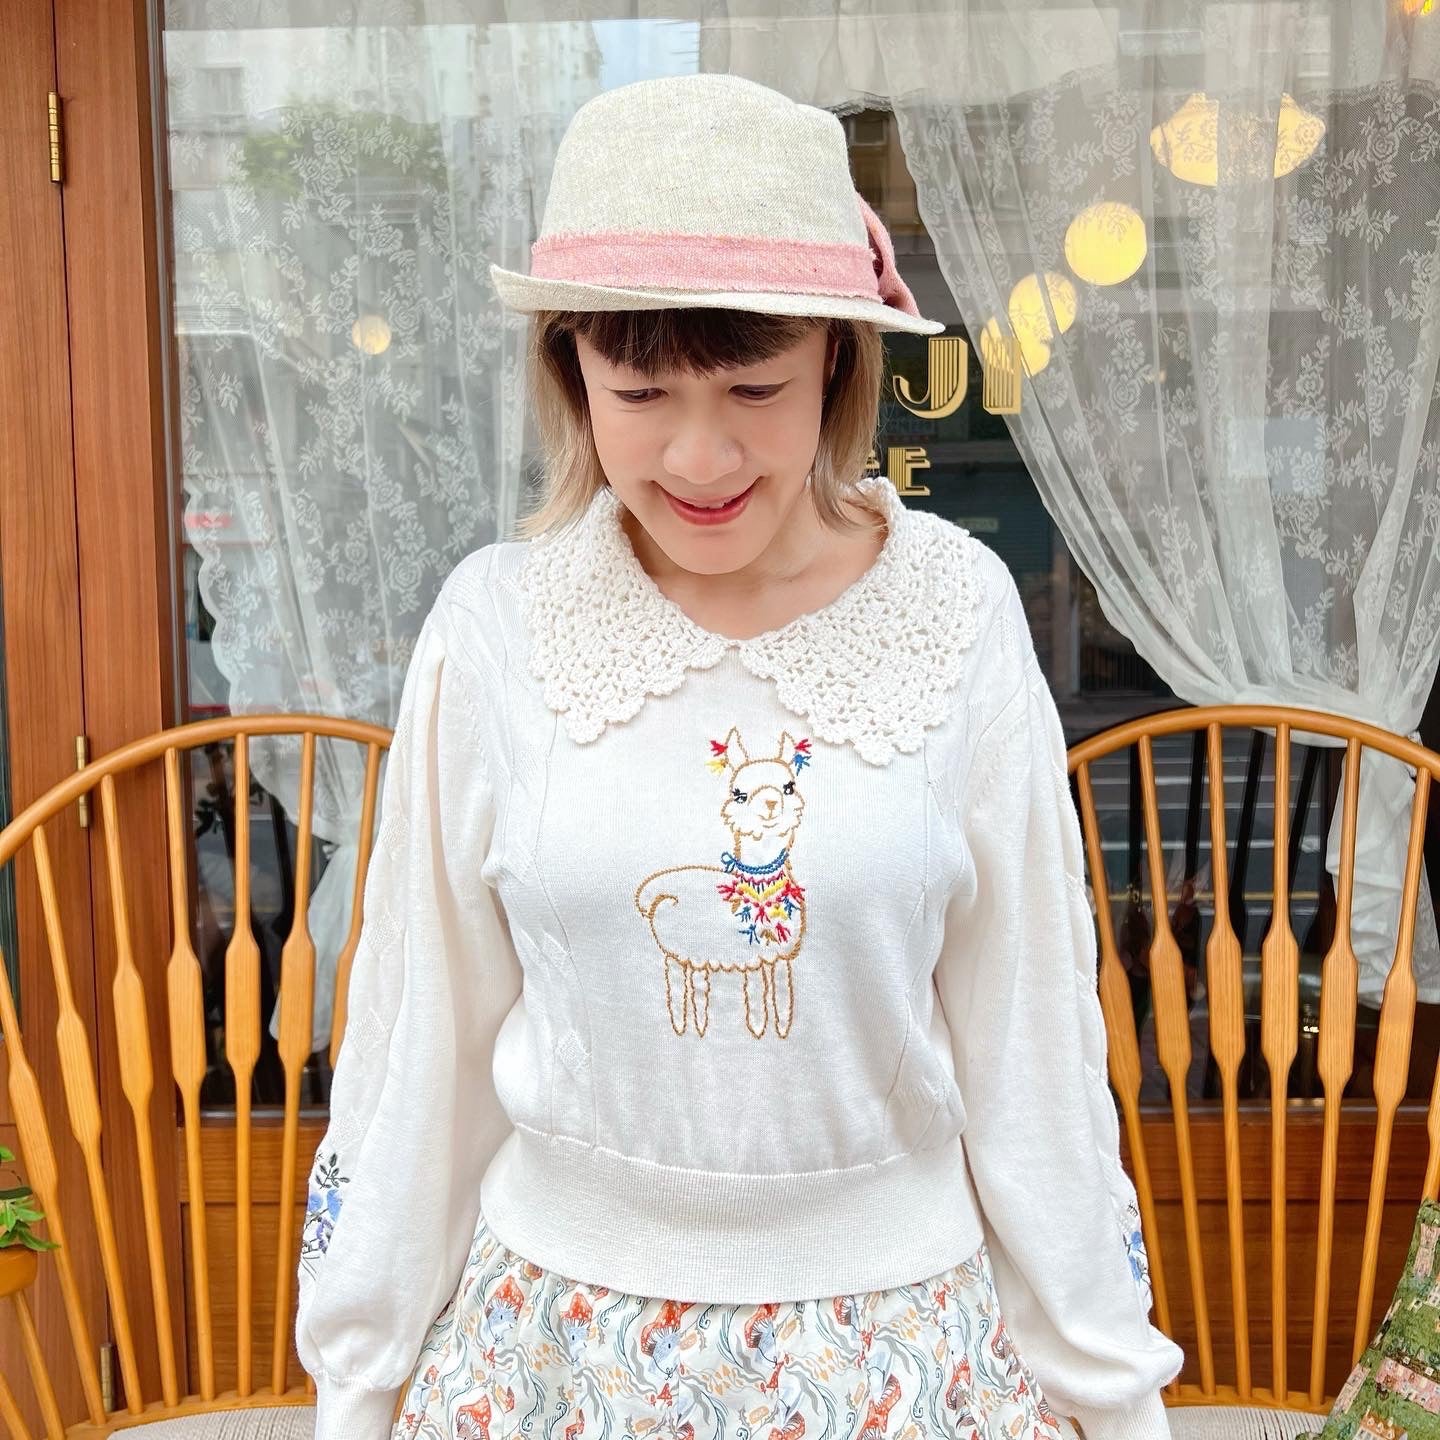 Hand Crochet And Alpaca Embroidery Sweater